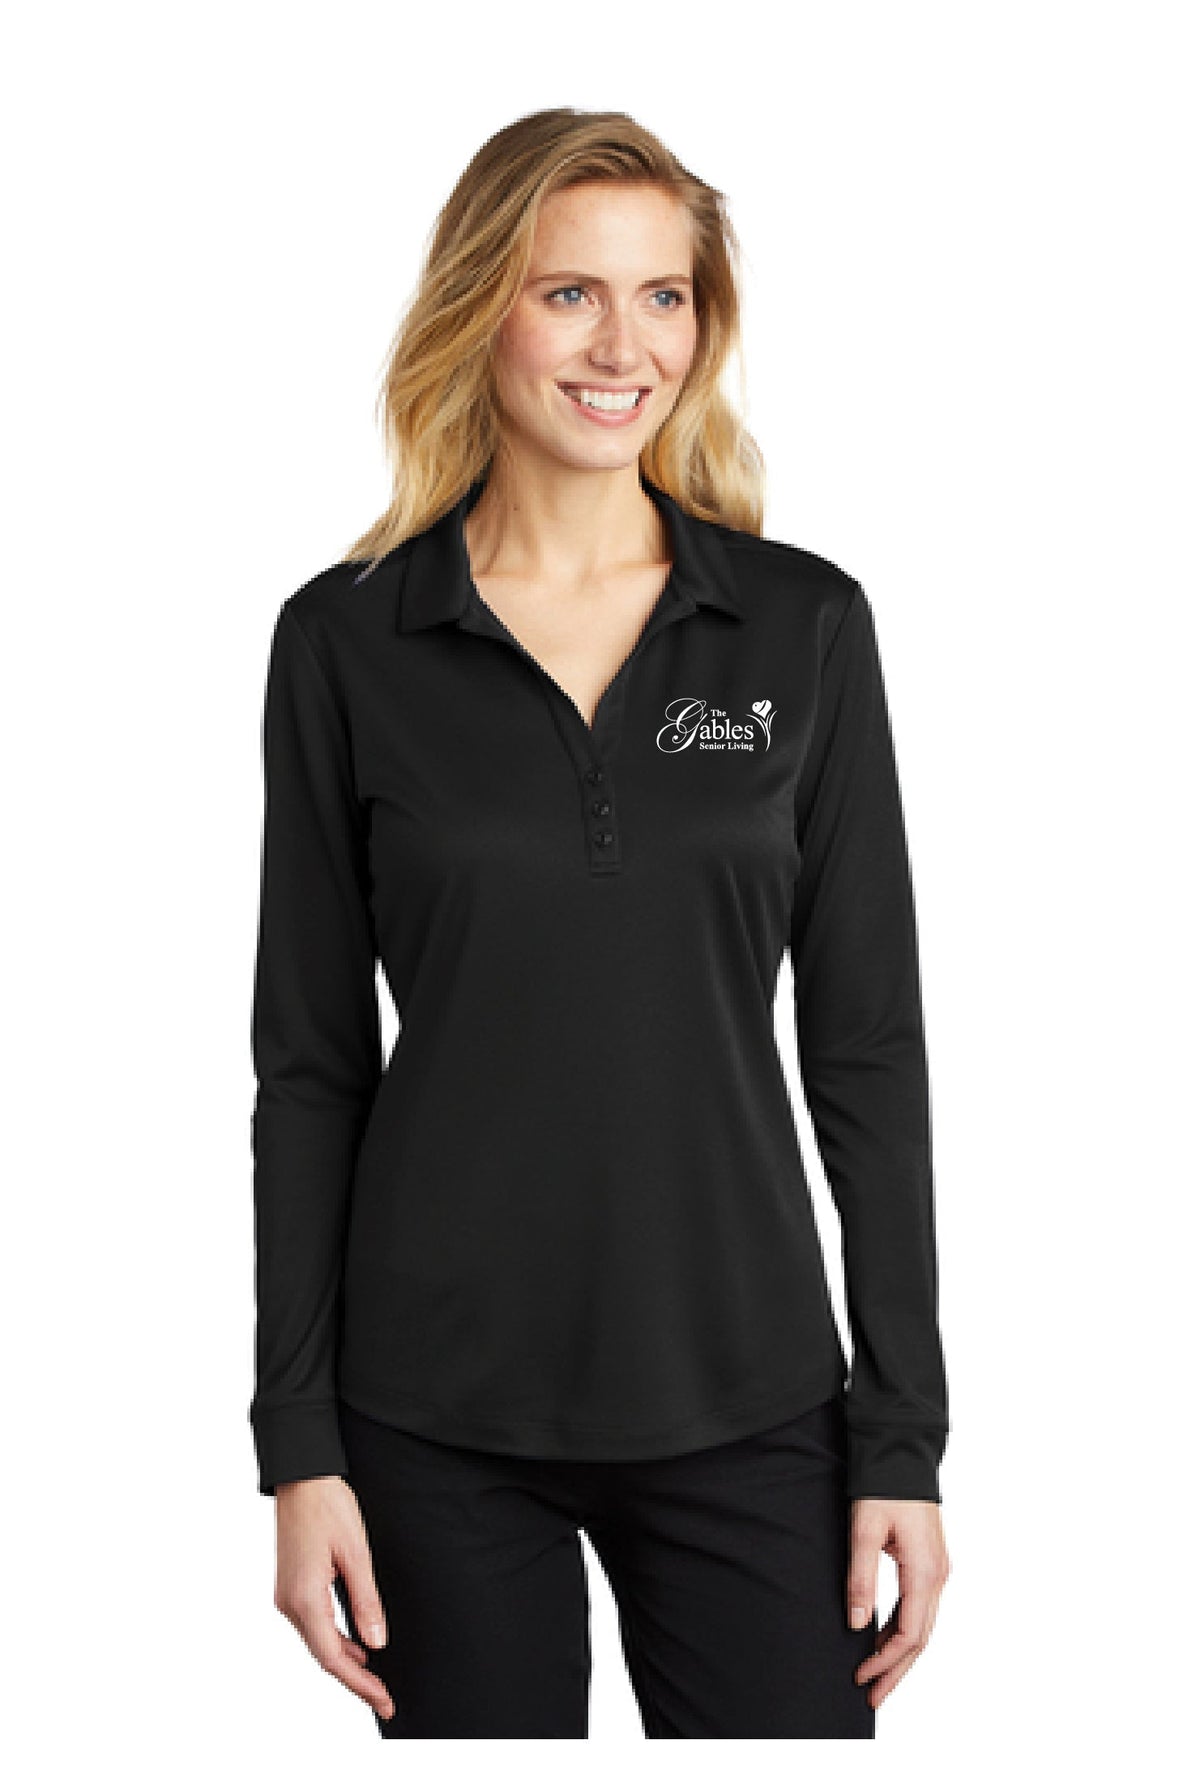 The Gables - L540LS Ladies Black Silk Touch™Performance Long Sleeve Polo